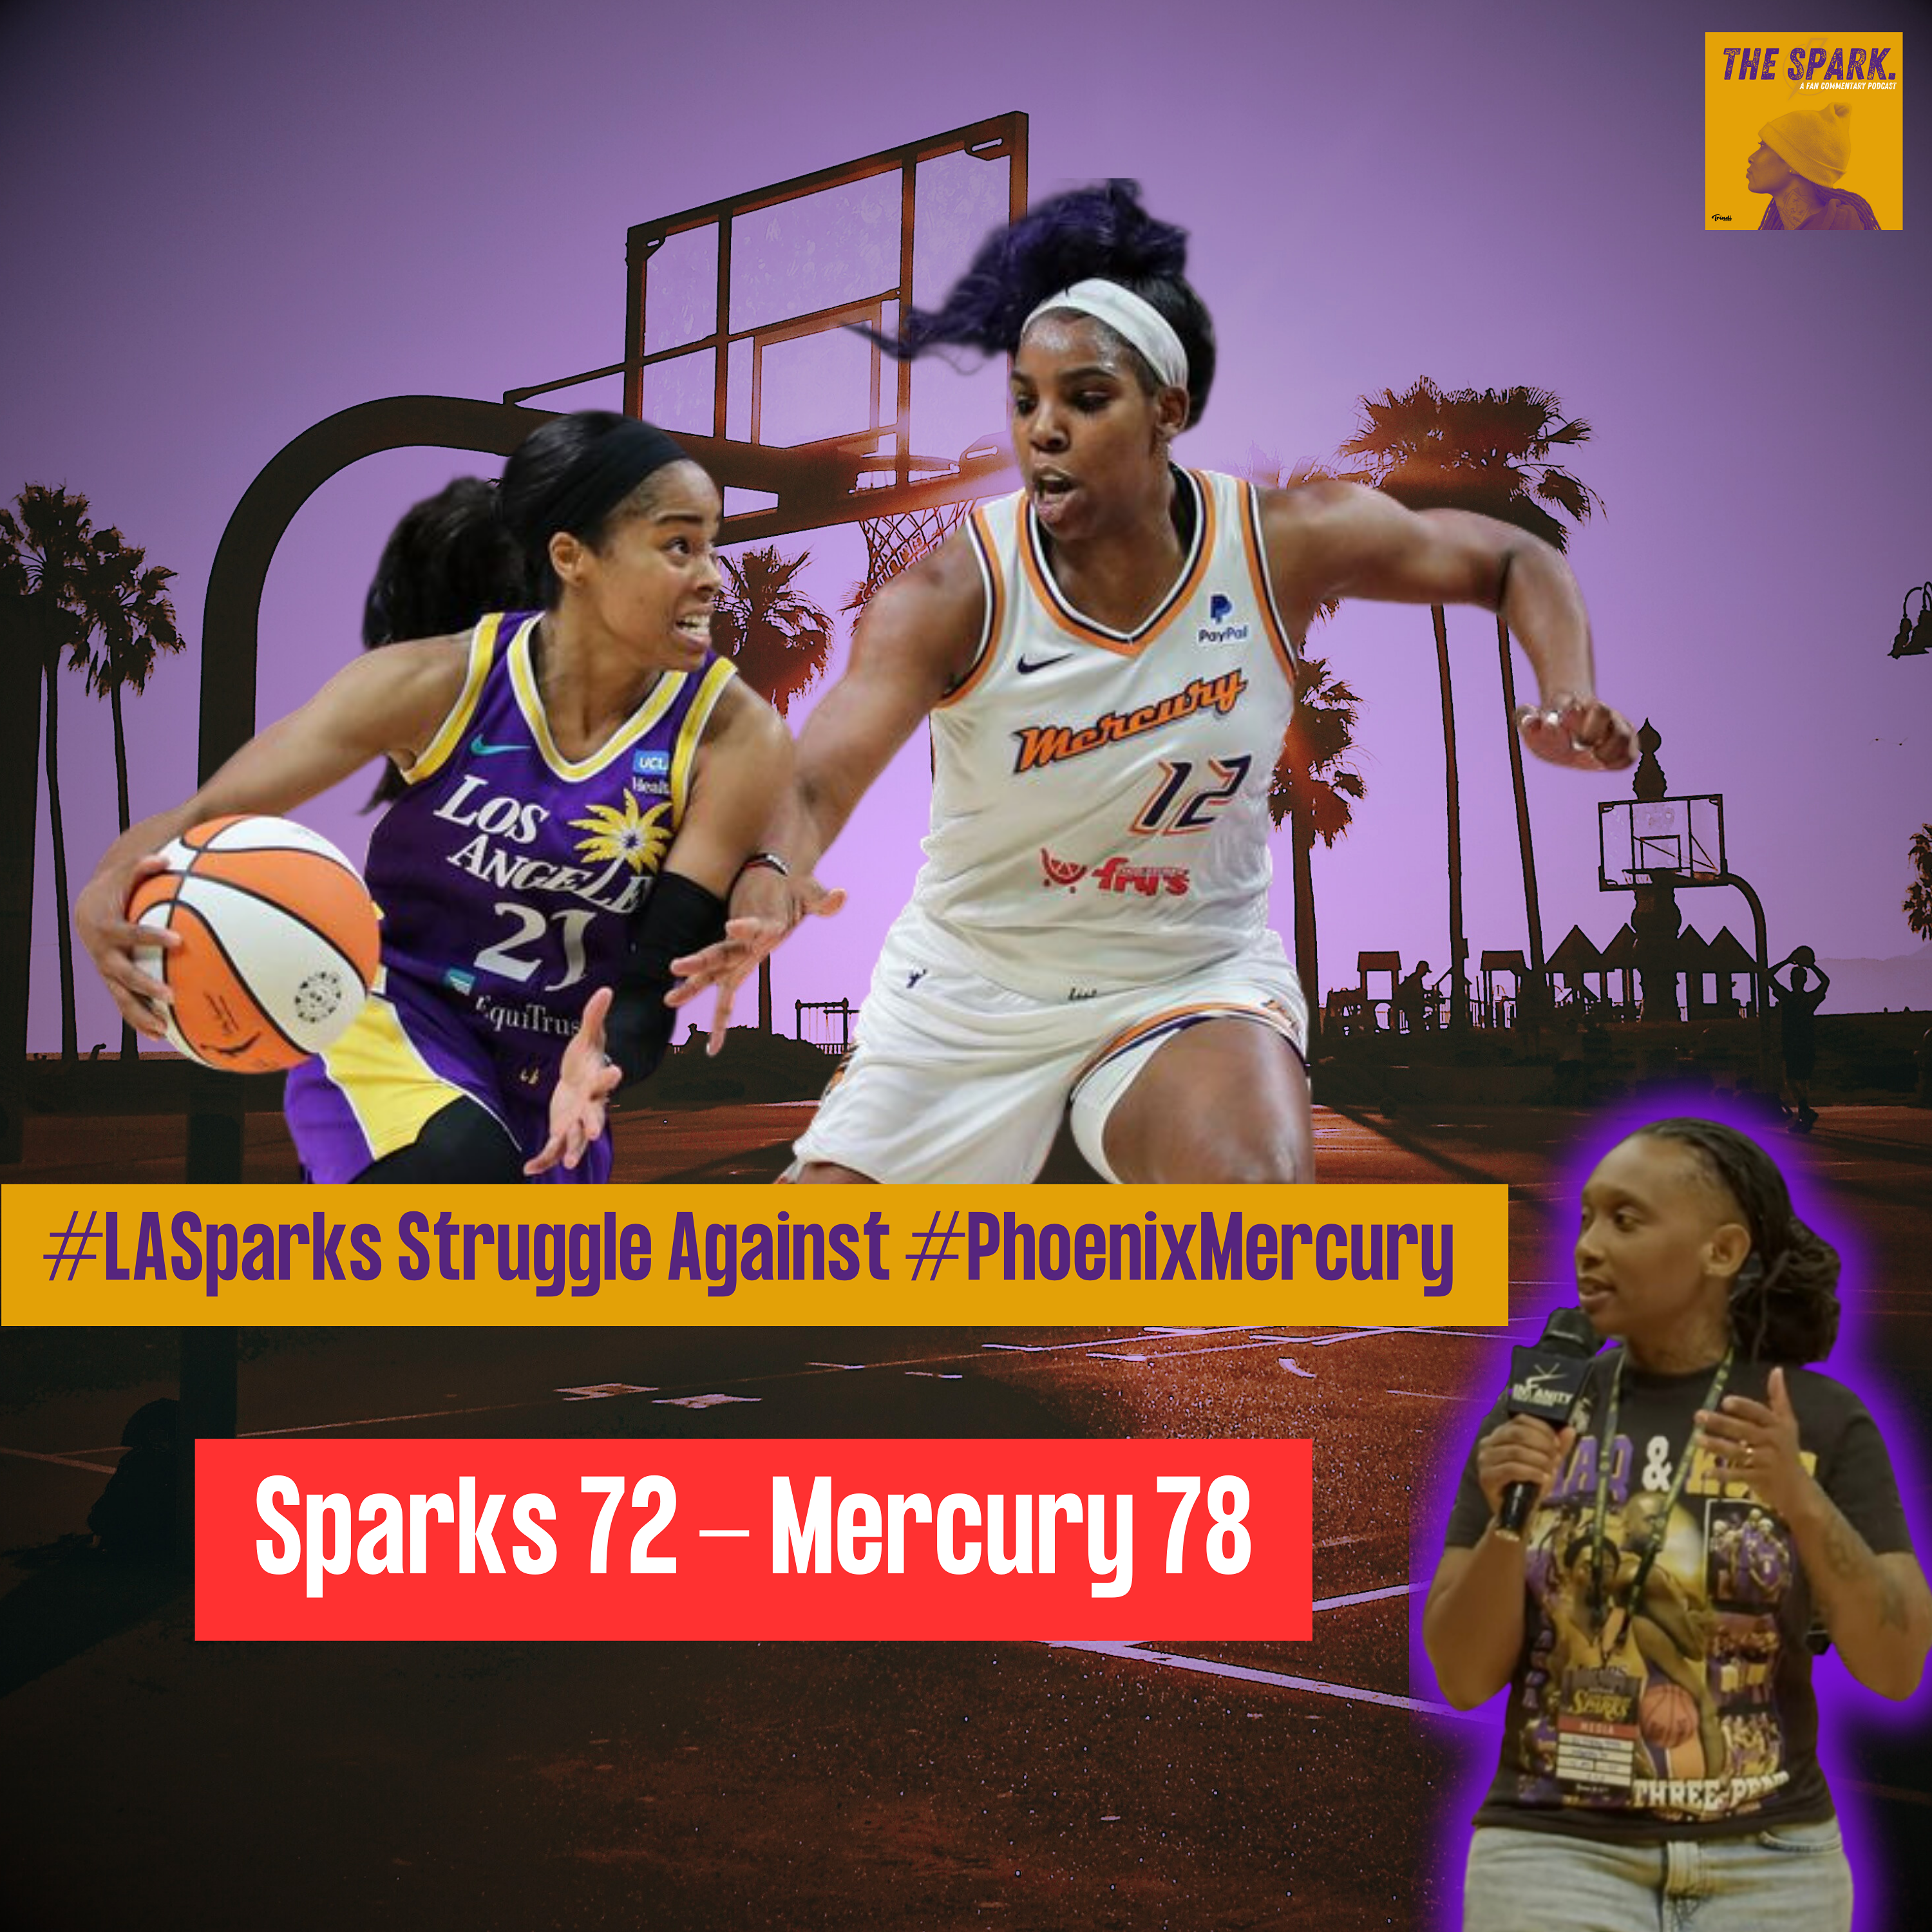 #LASparks Struggle Against #PhoenixMercury, Brittney Griner Leads with 29 Points and Milestone Dunk